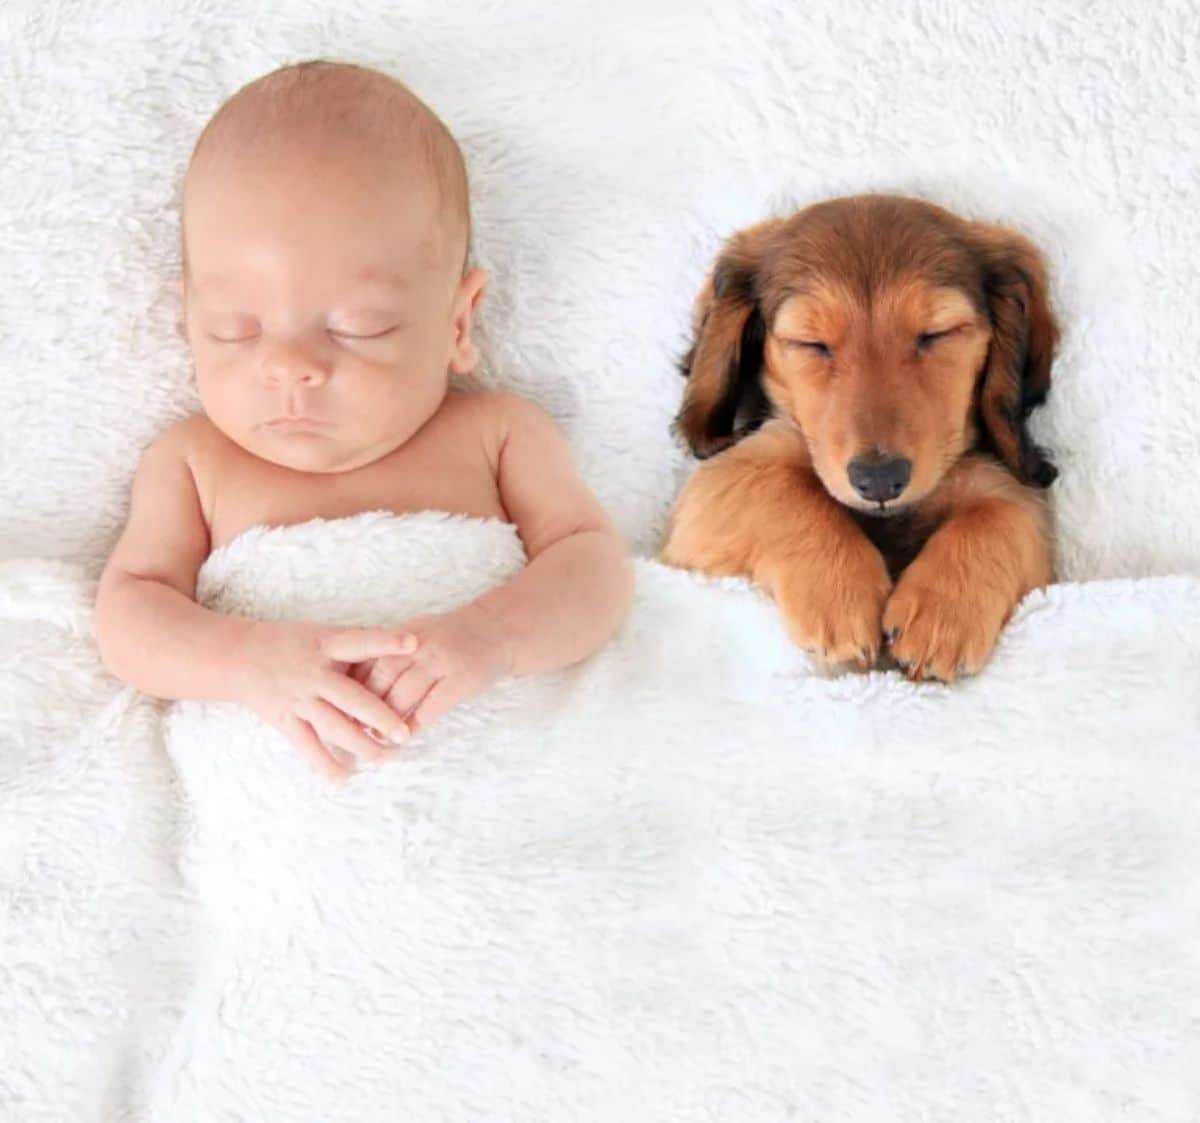 baby and brown dachshund puppy sleeping tucked under a white blanket